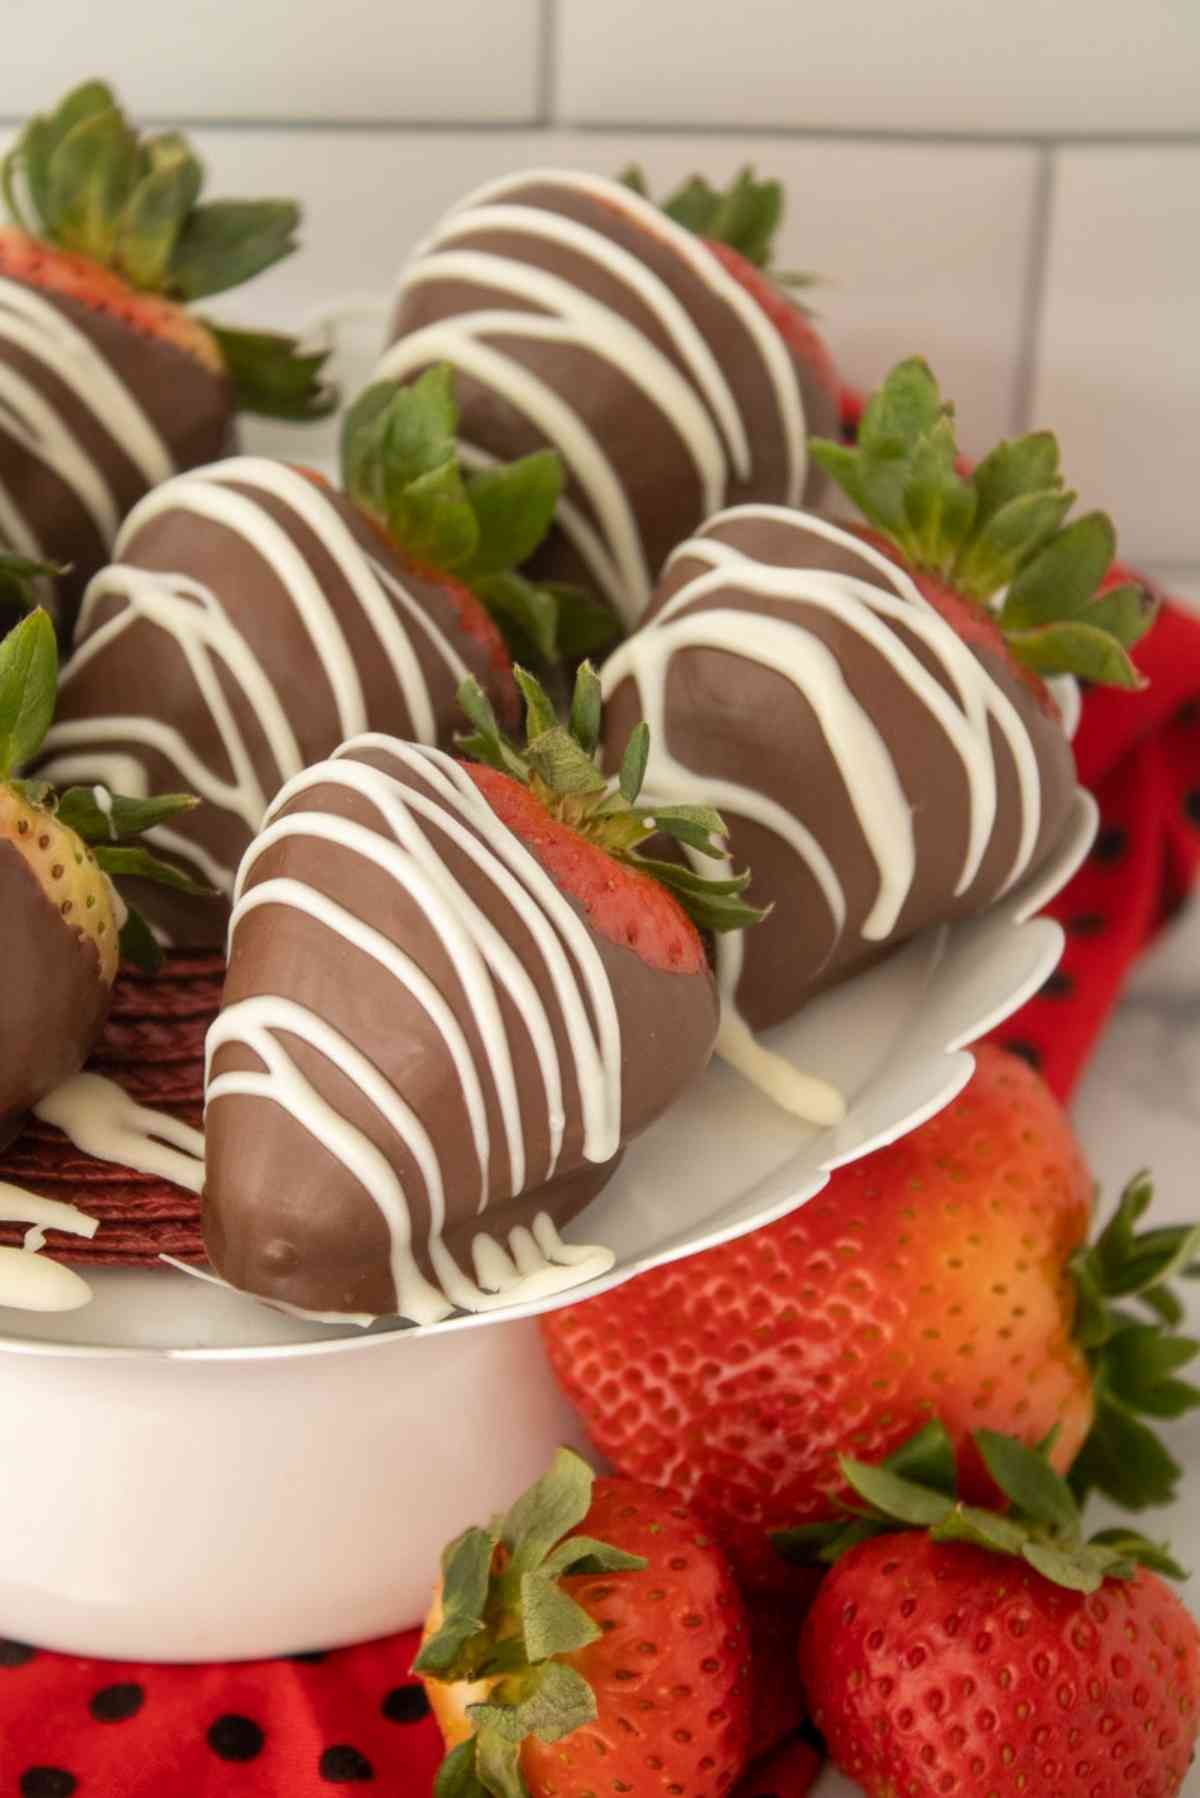 Fresh strawberries dipped in delicious chocolate and drizzled with white chocolate!